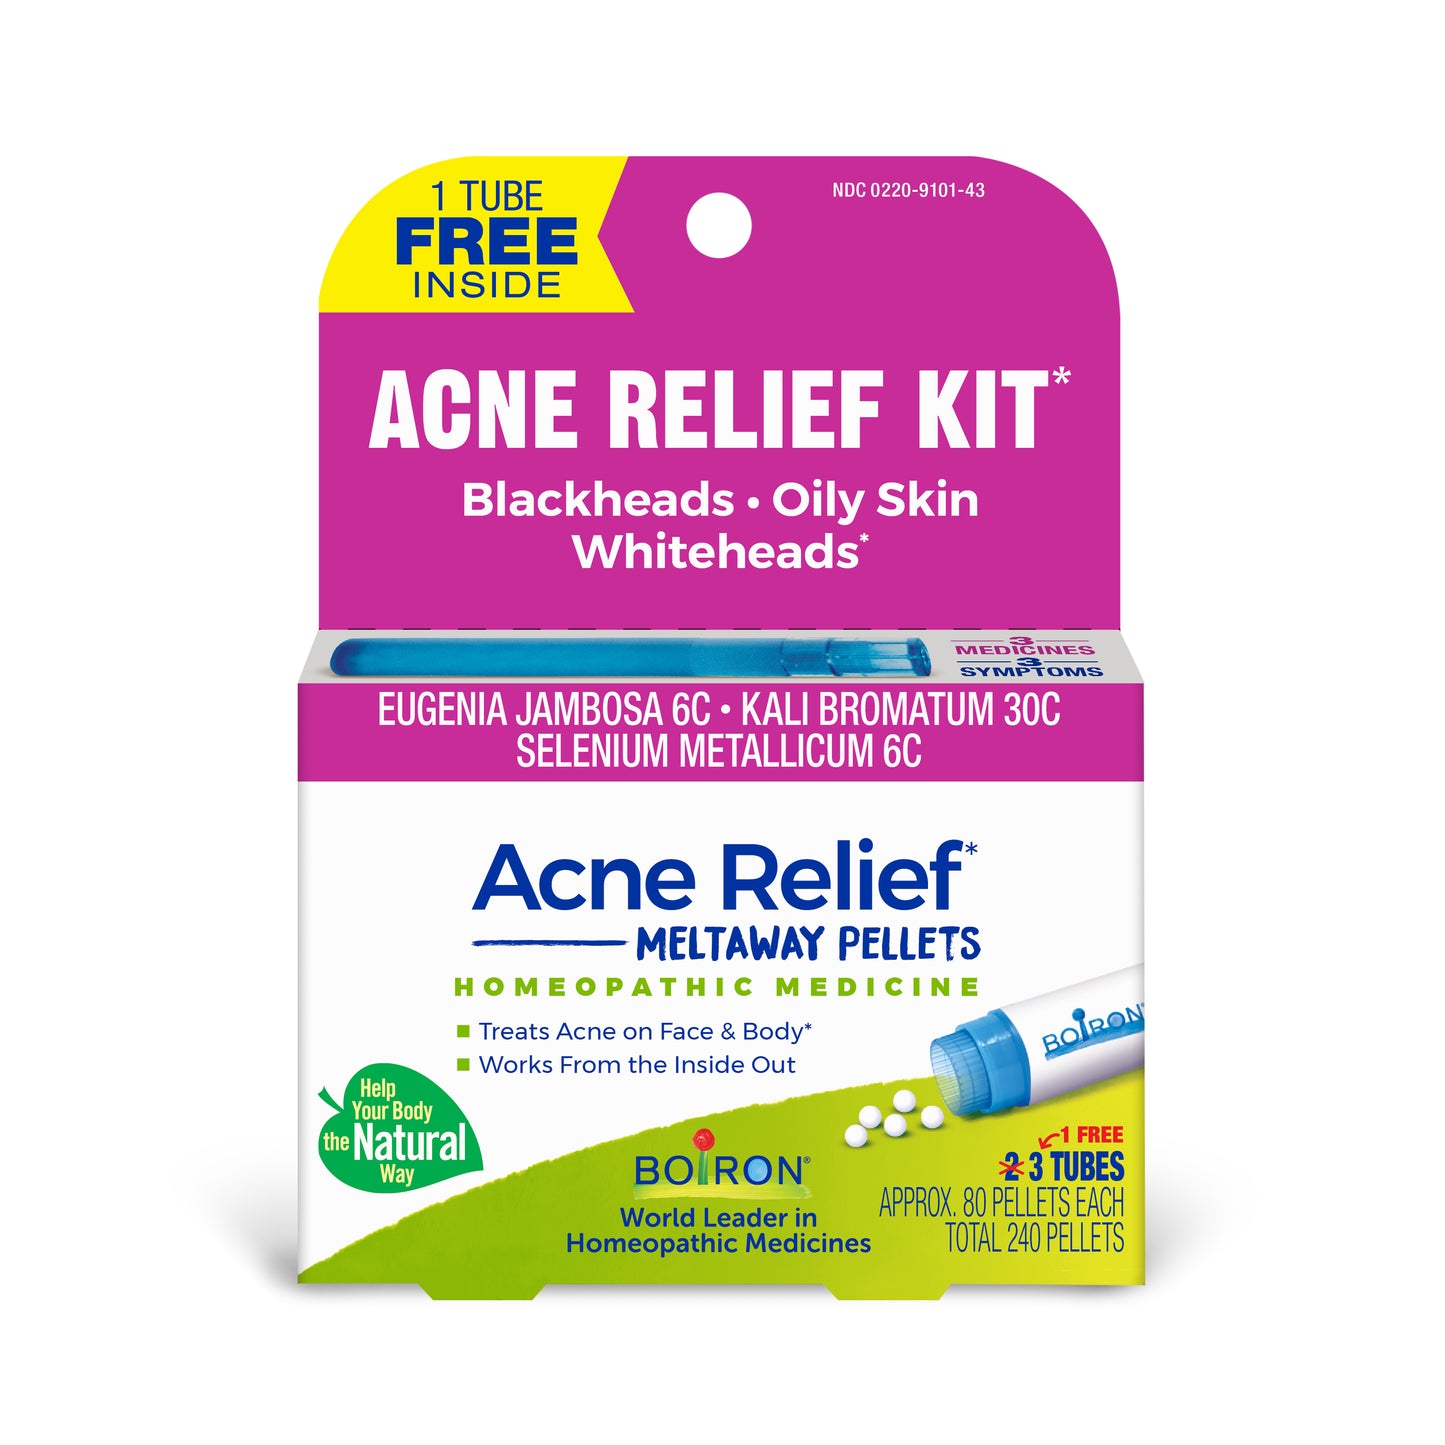 Acne Relief Kit